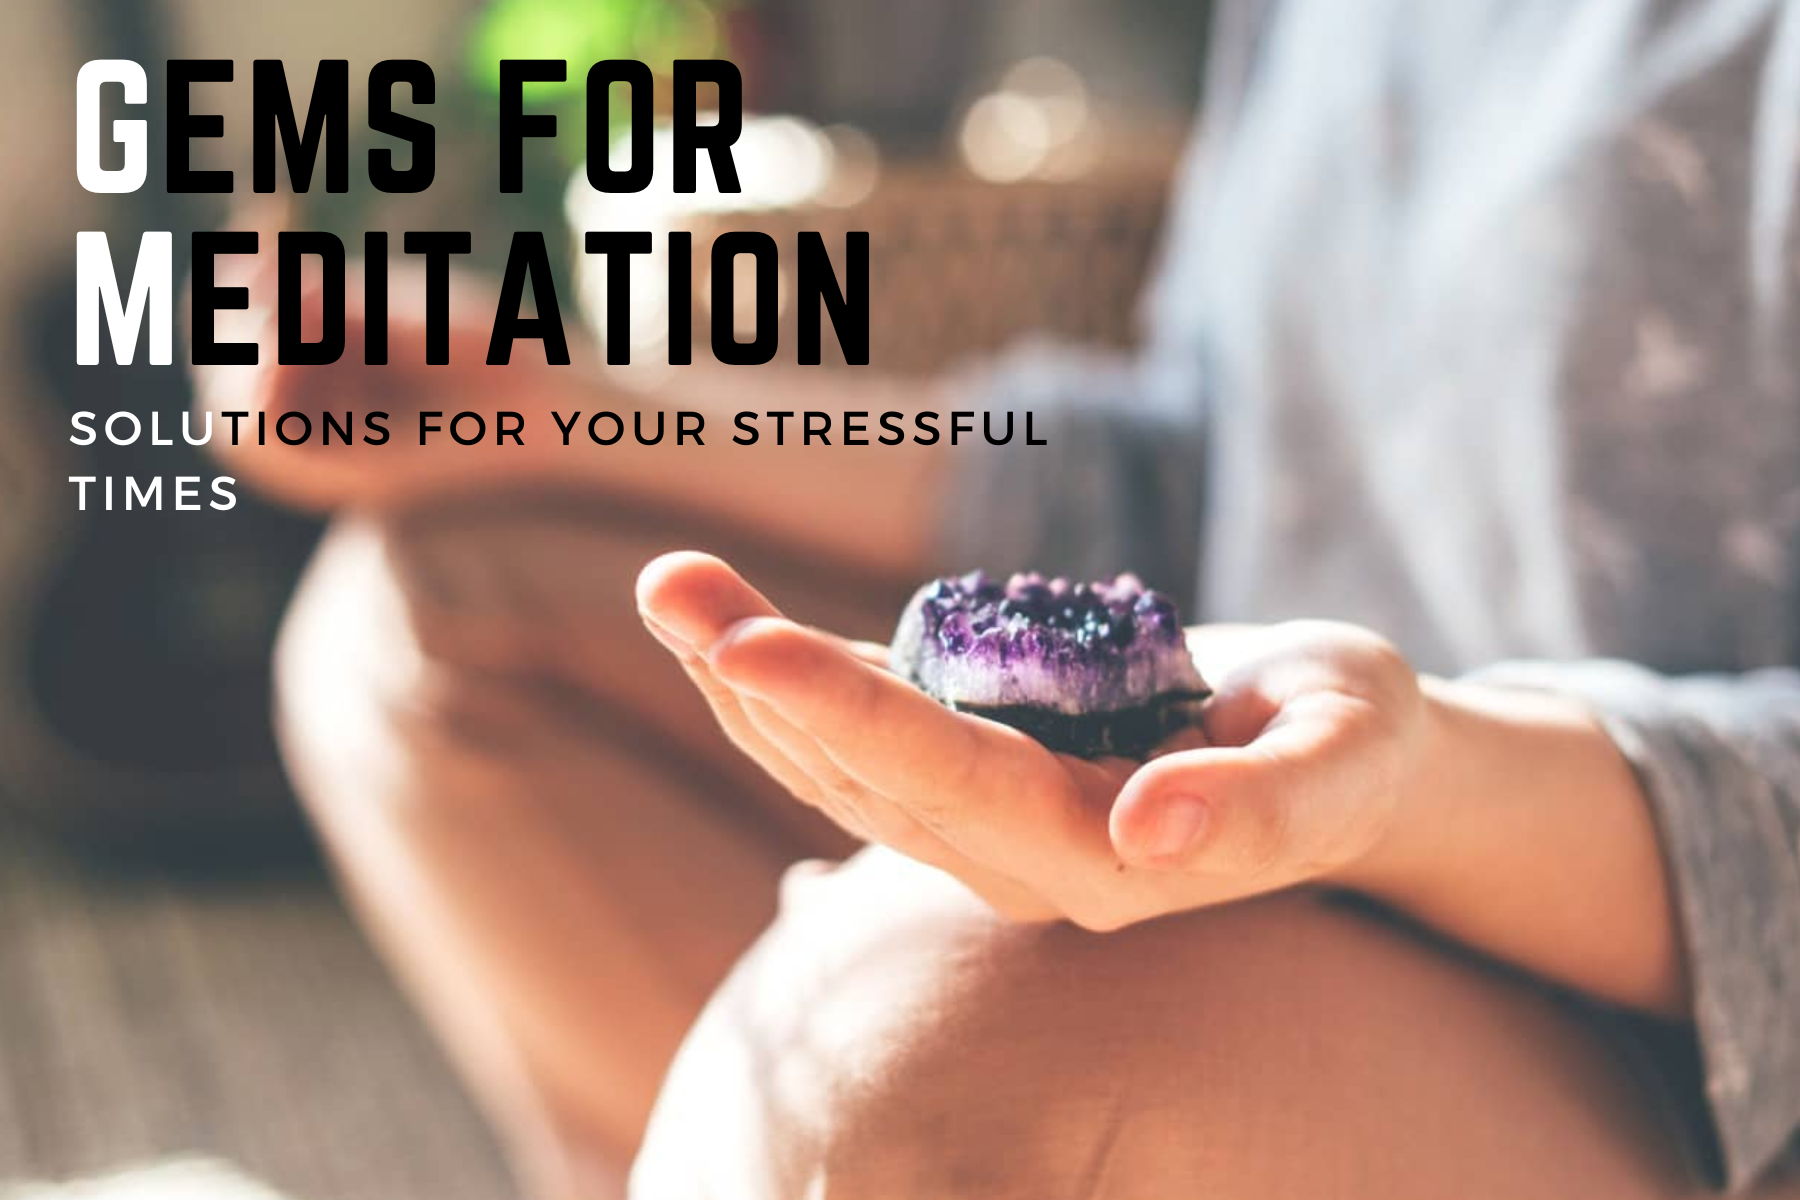 Gems For Meditation - Solutions For Your Stressful Times